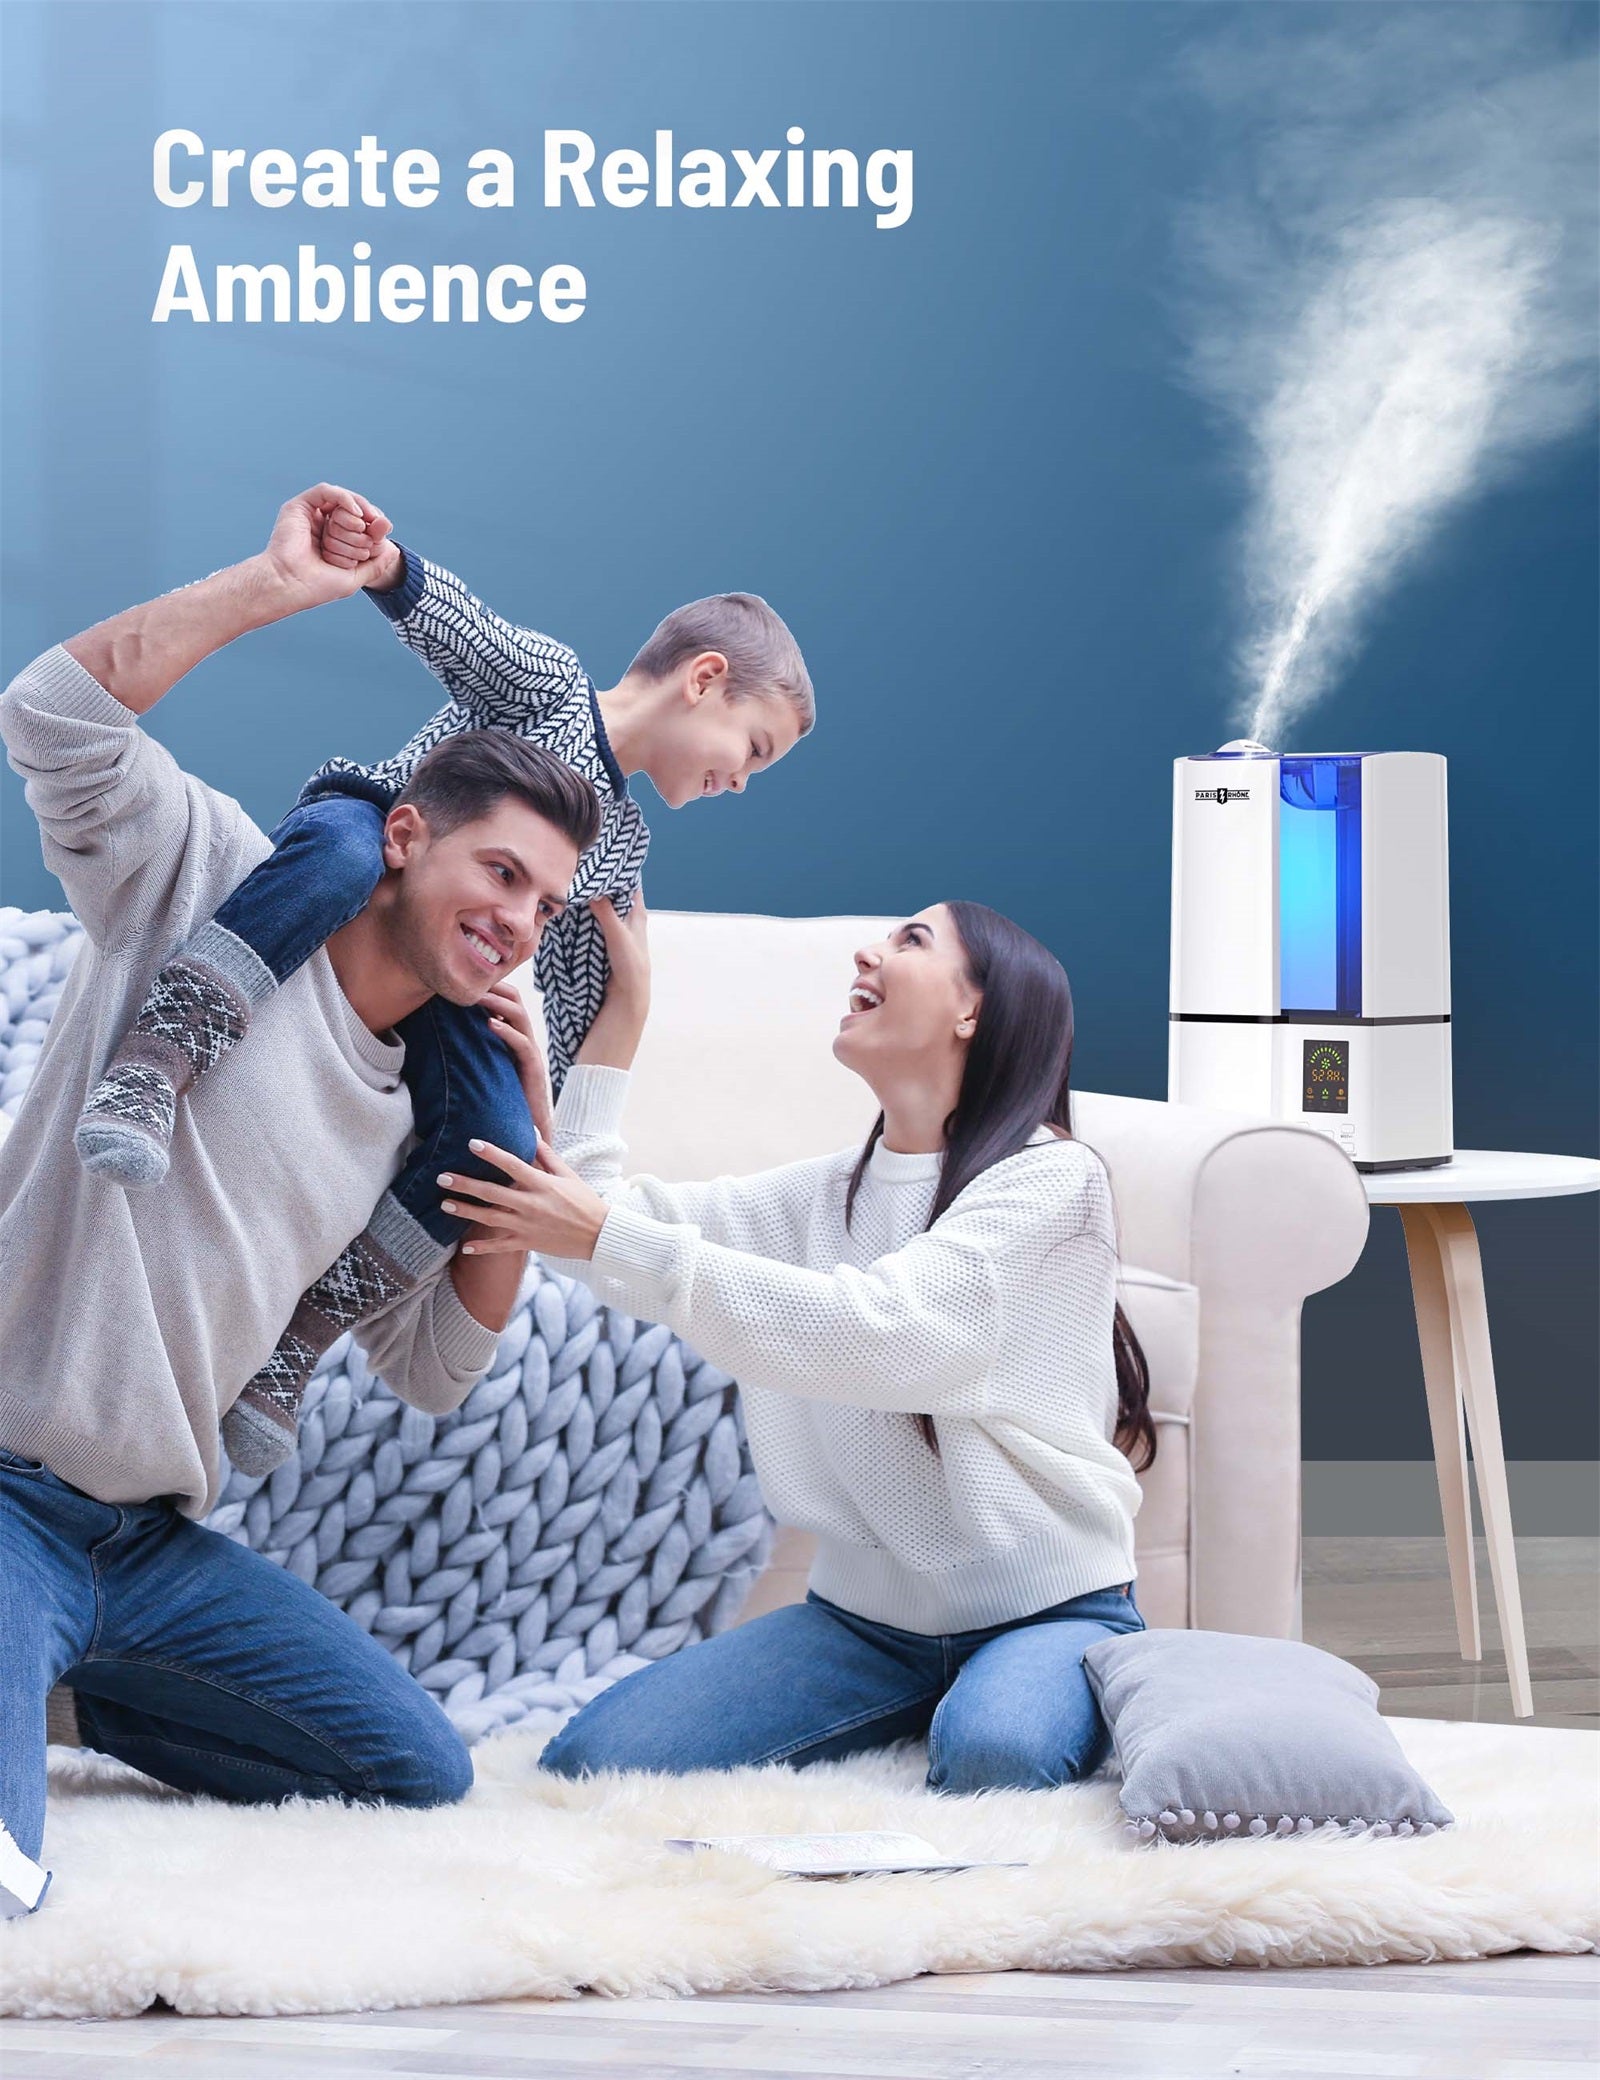 4L Cool Mist Humidifier 001,Smart Ultrasonic Humidifier for Middle Room